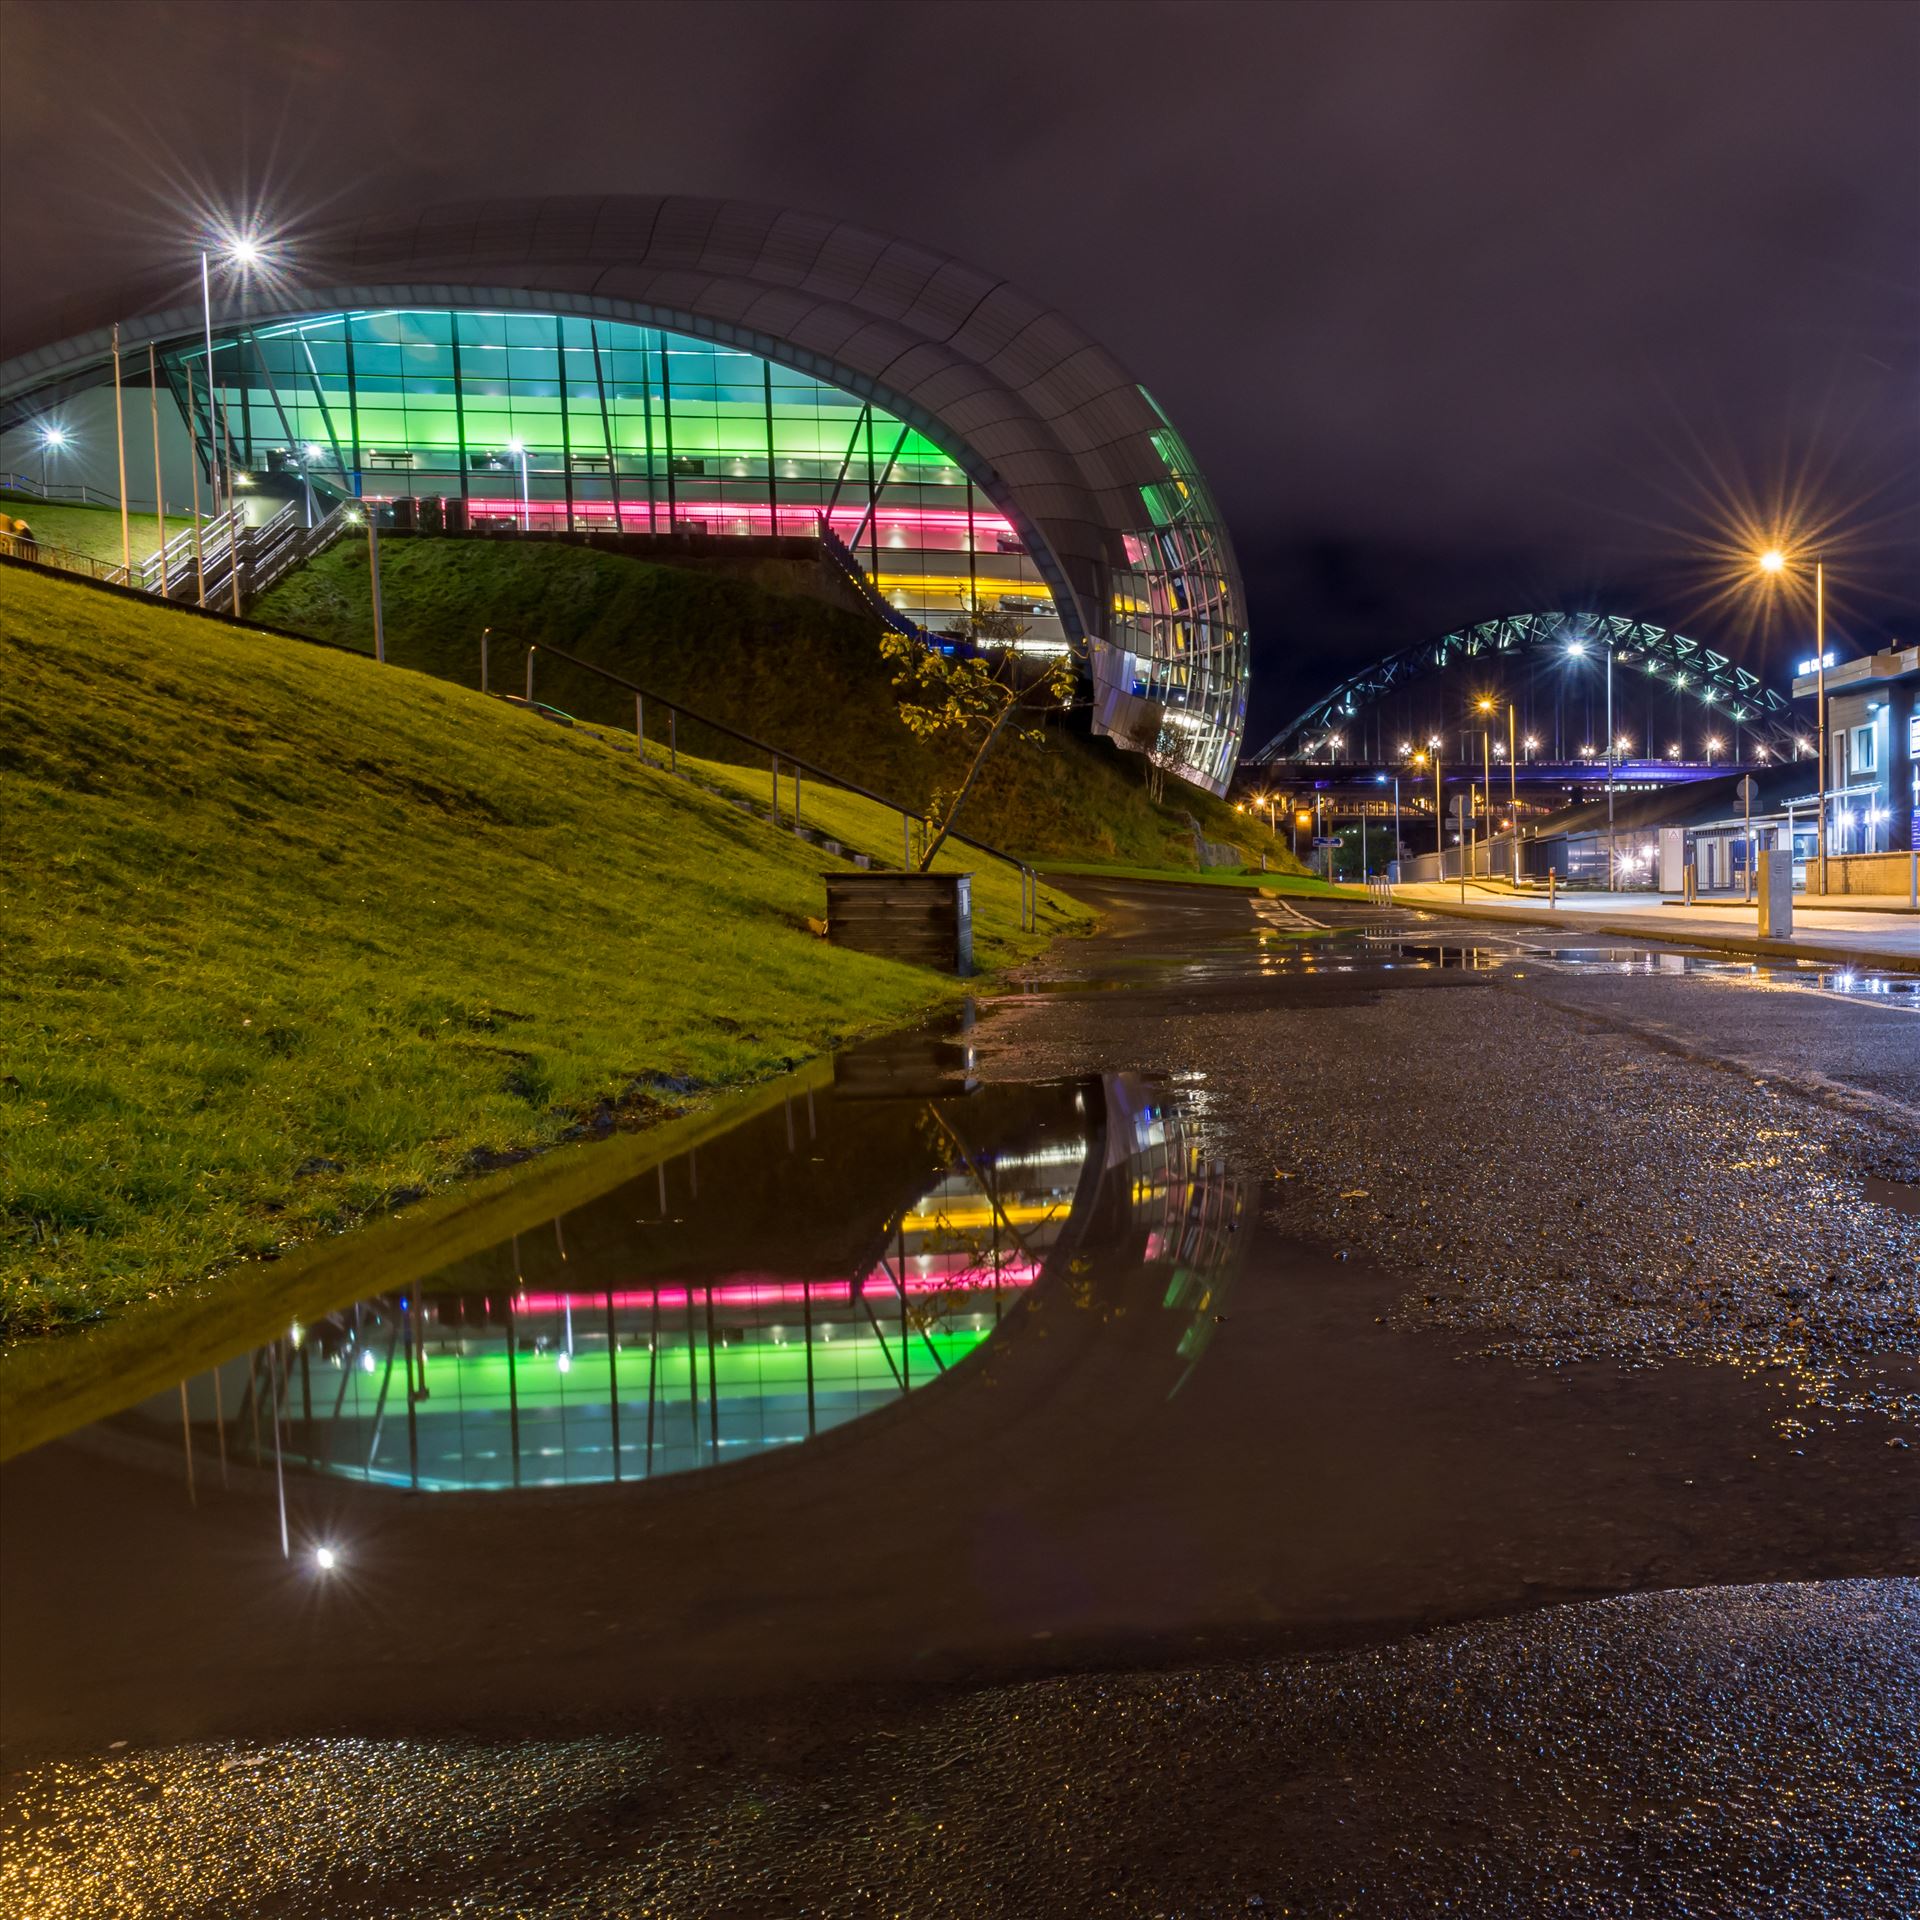 Reflections on Gateshead quayside  by philreay